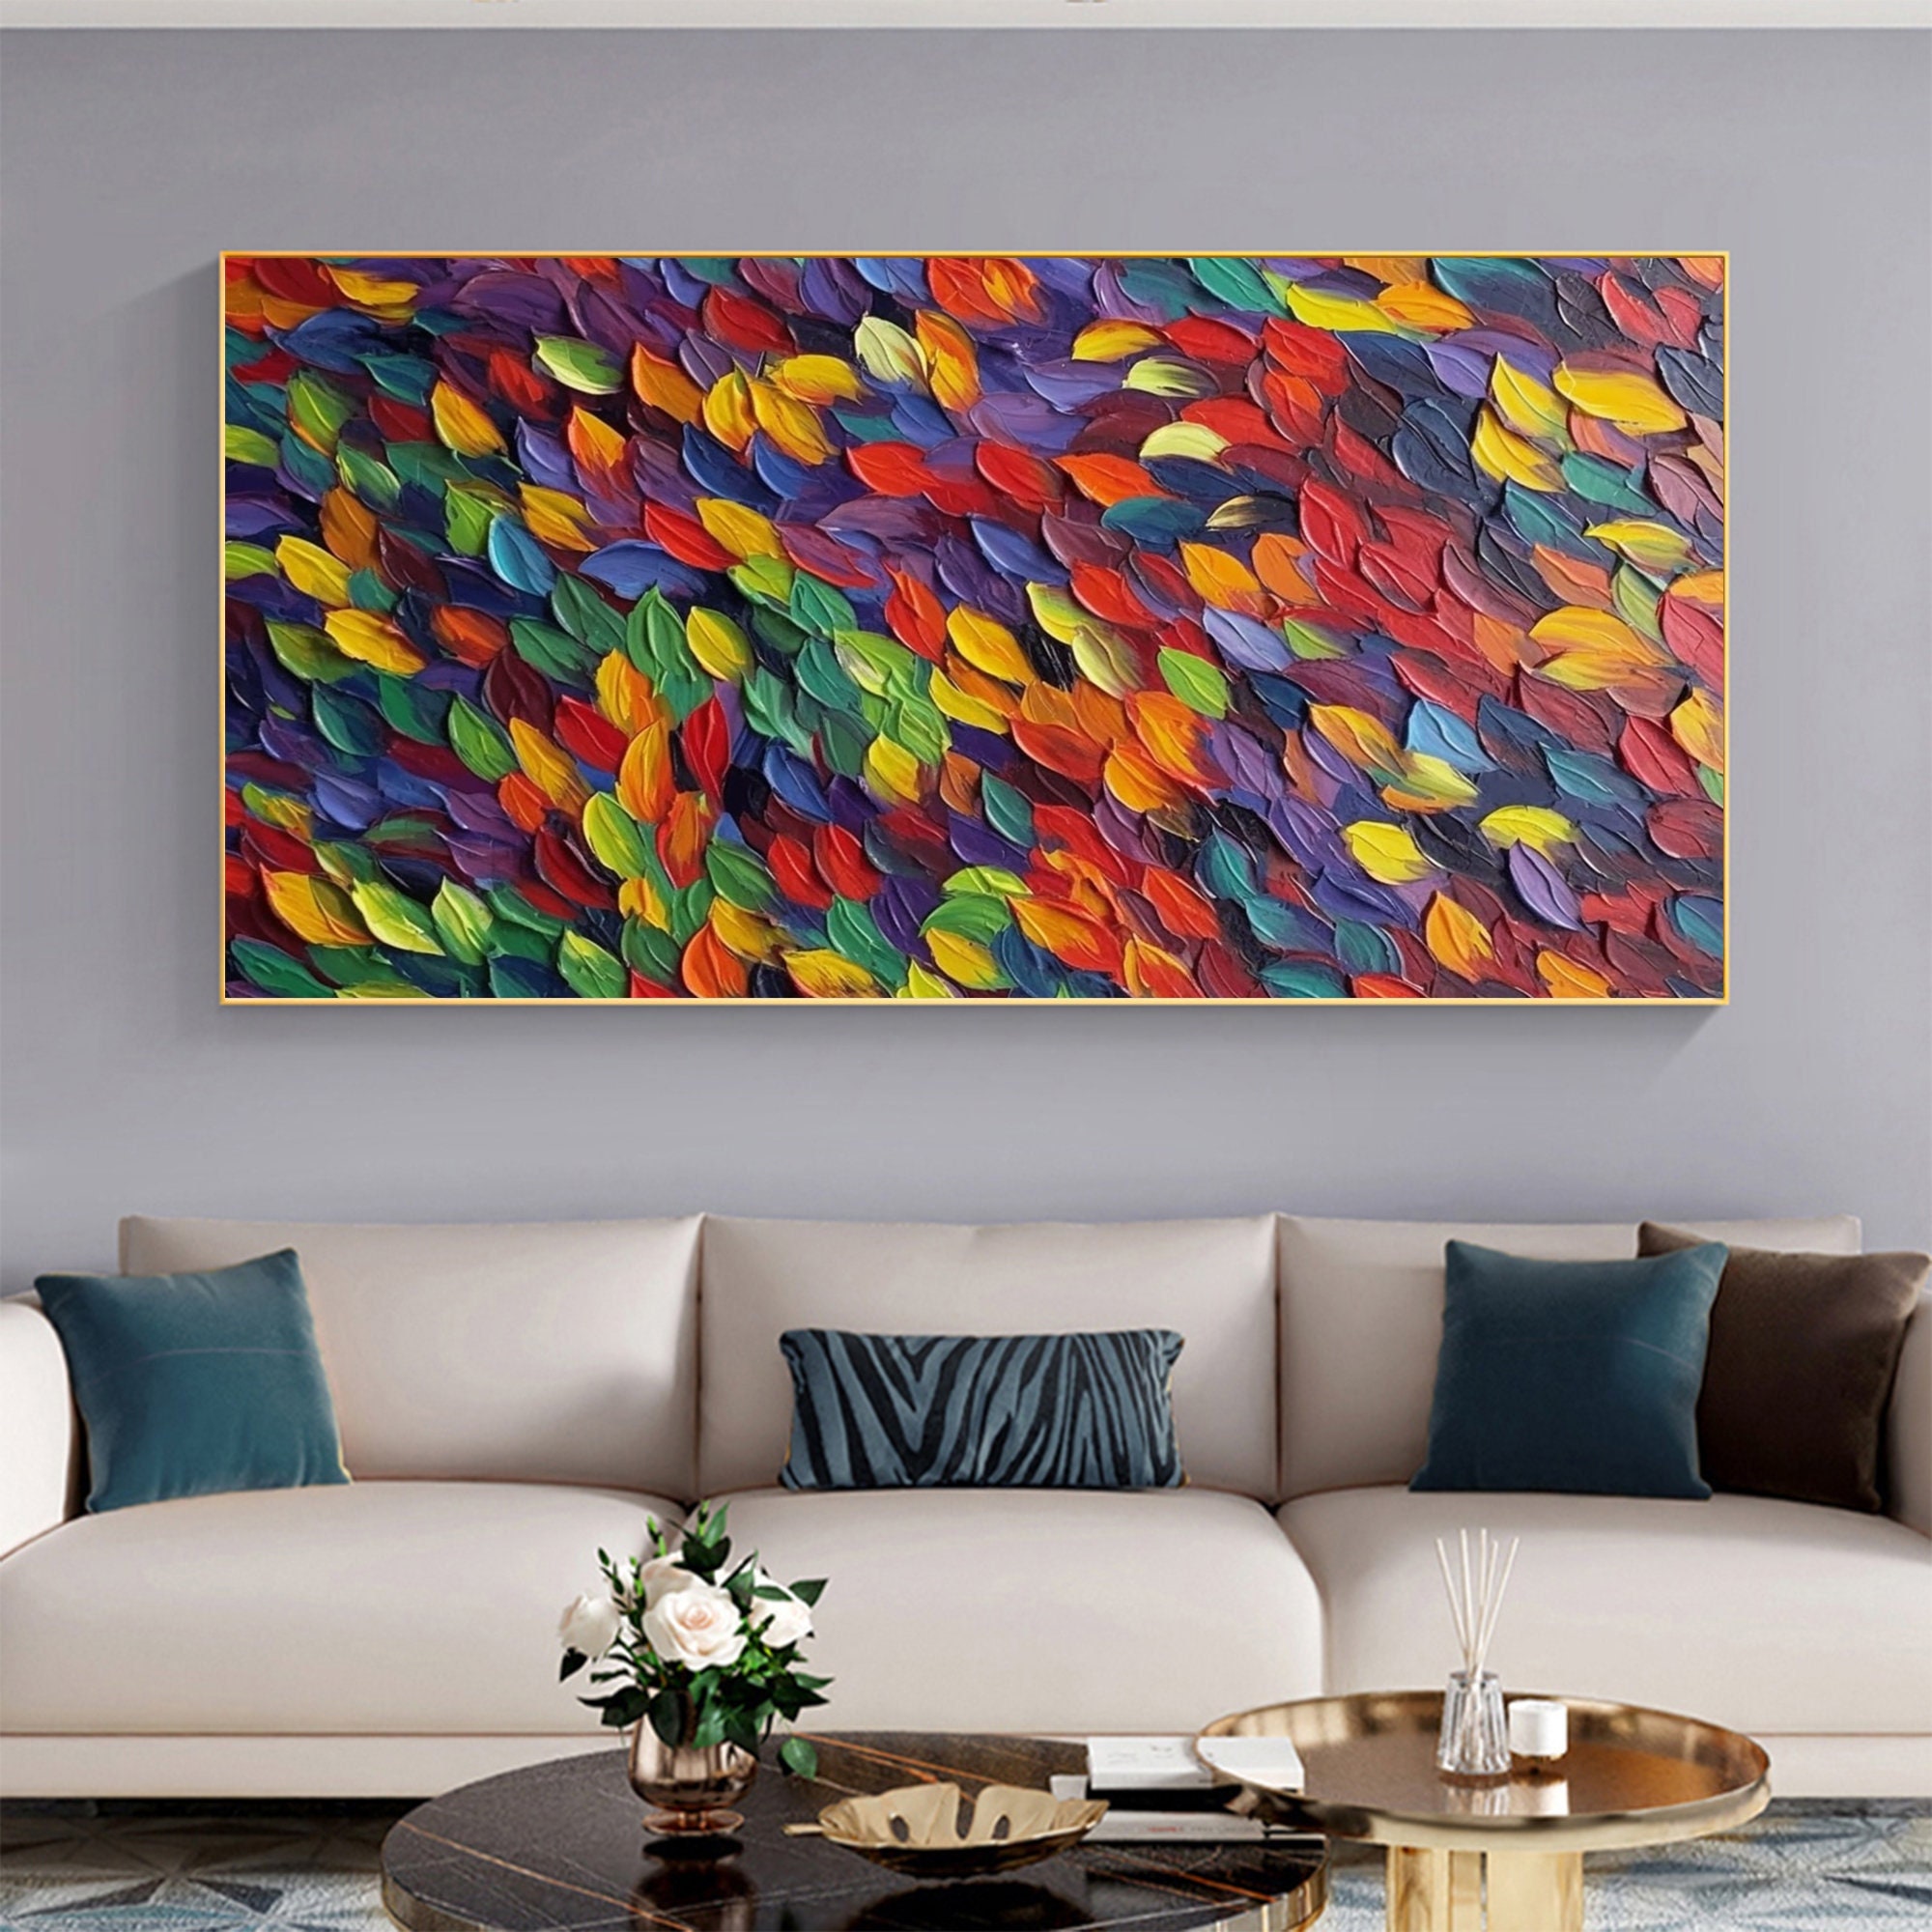 Abschlag Large Original Colorful Painting,living Art, Oil on Colorful - Canvas Wall Feathers Painting Painting, Abstract Room Canvas, Wall Custom Decor Etsy